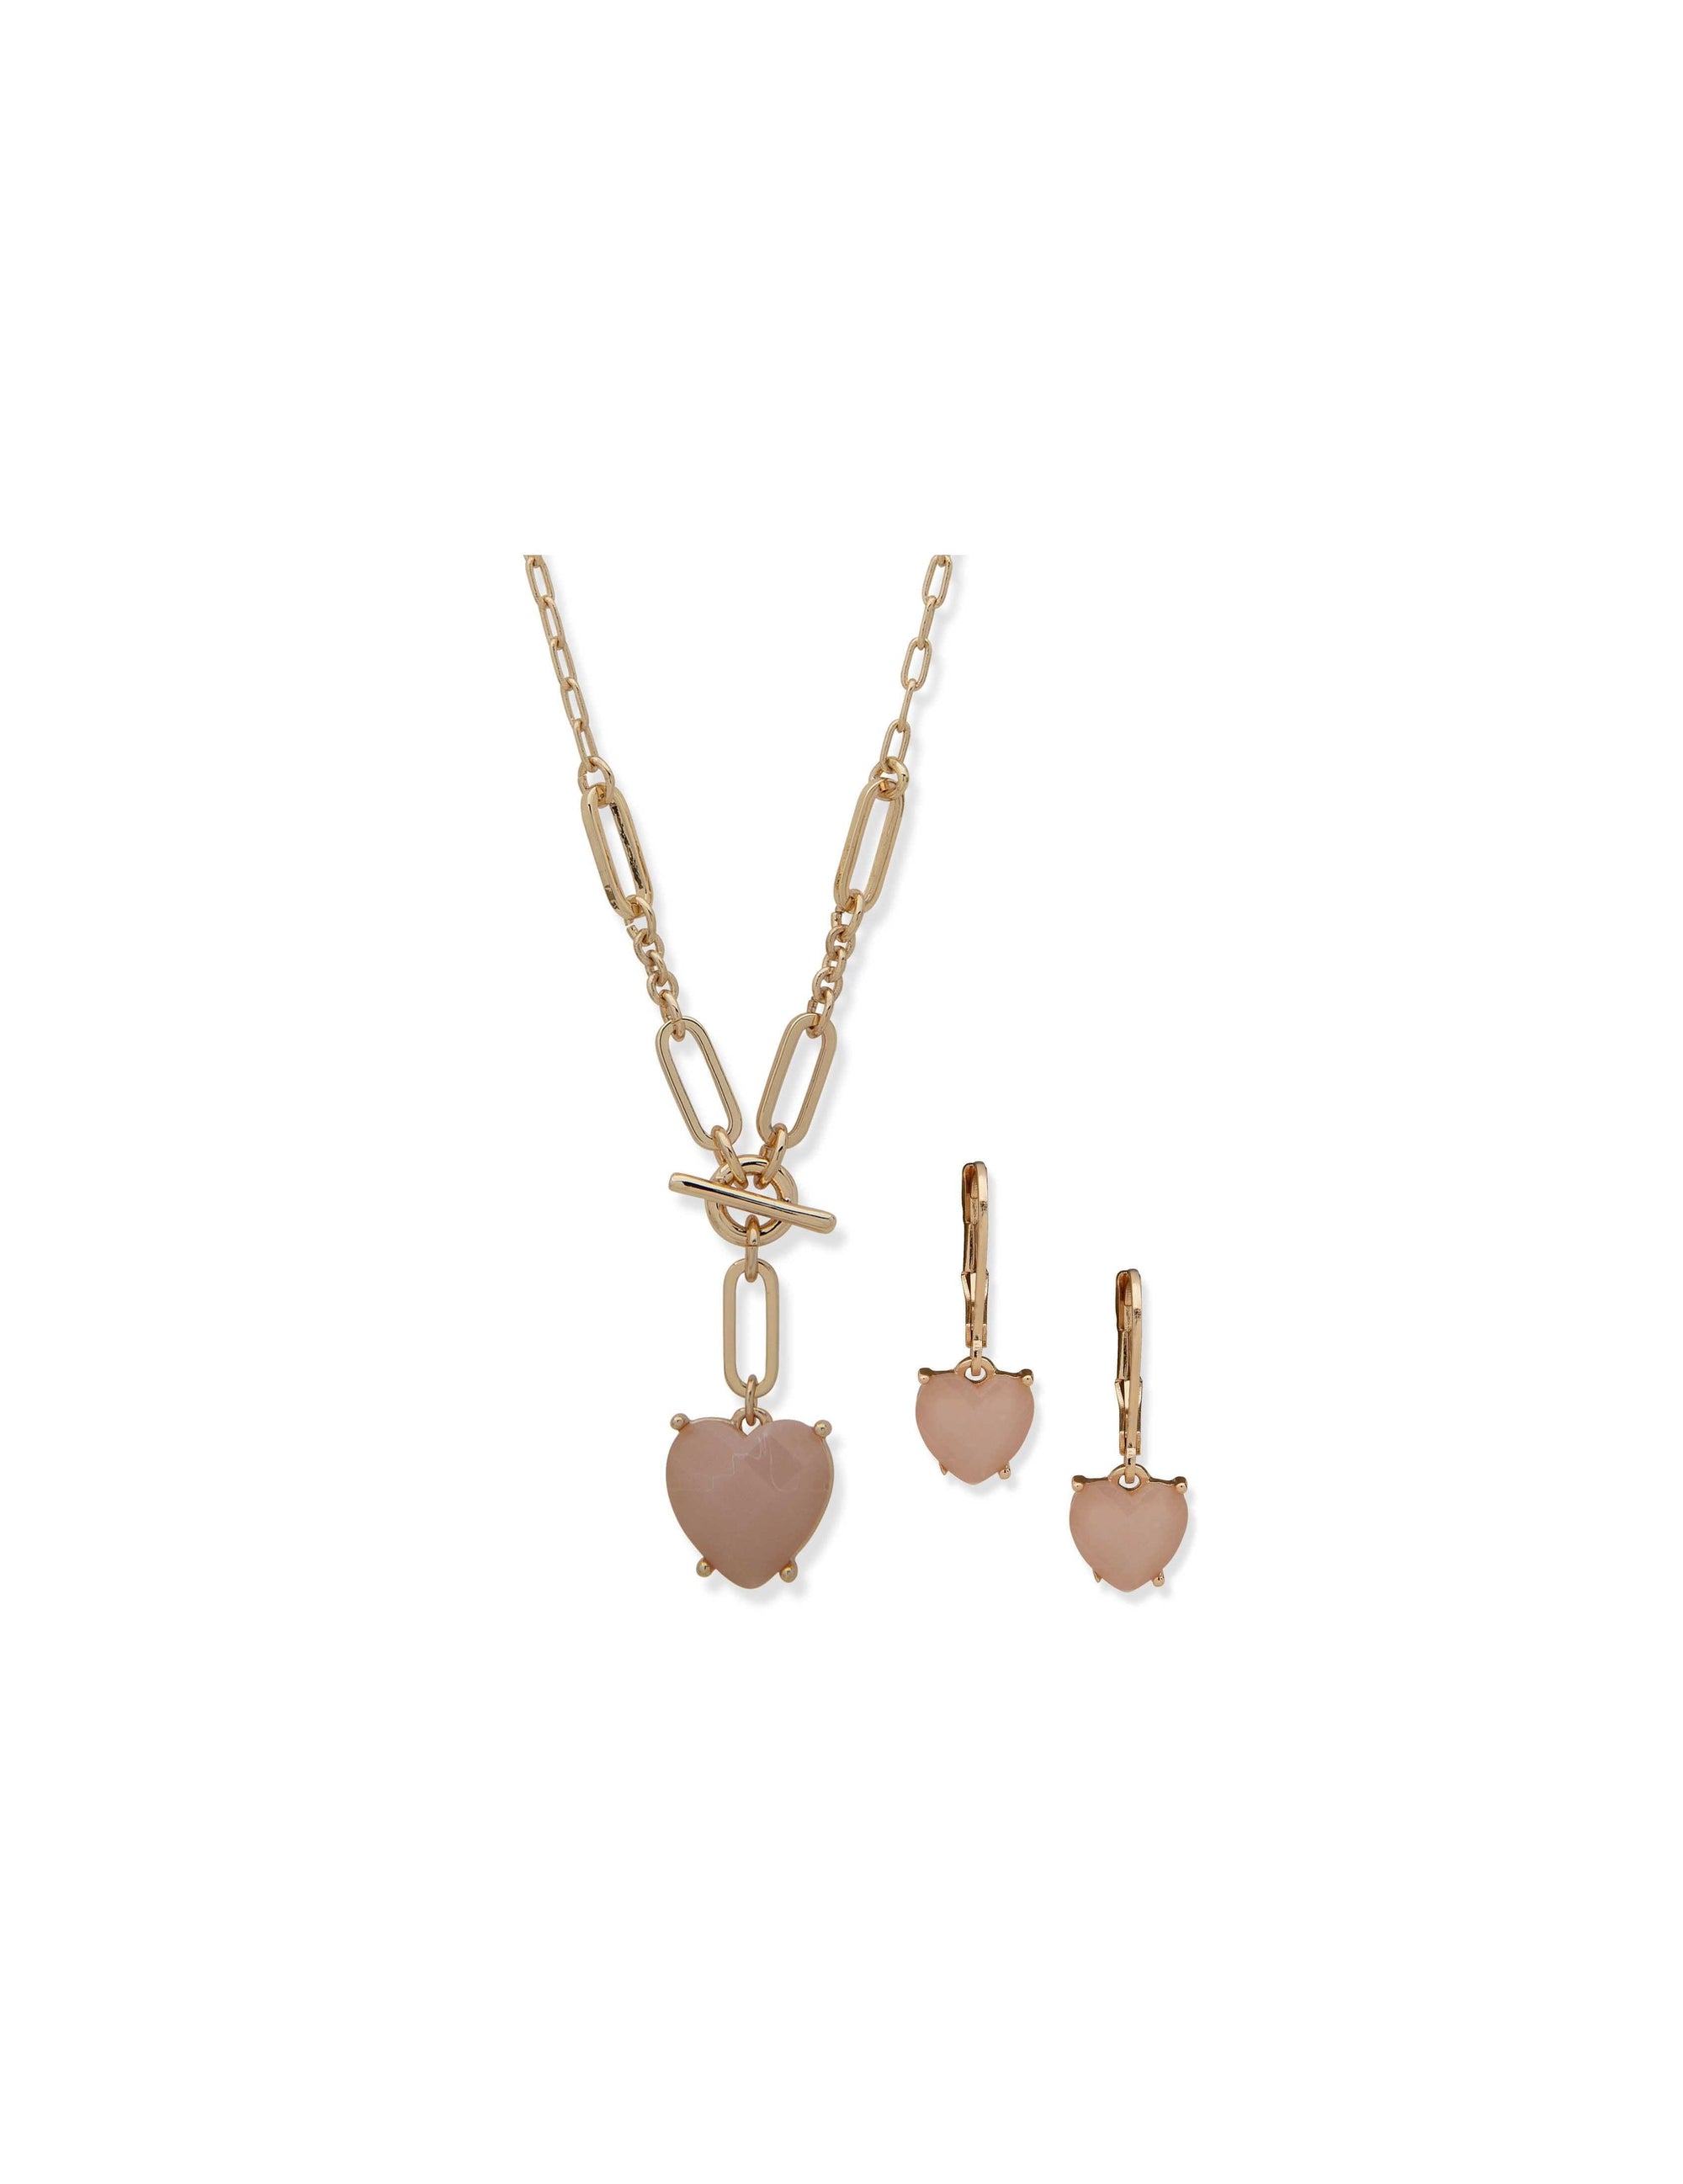 Anne Klein Gold-Tone Rose Quartz Heart Necklace and Earring Set